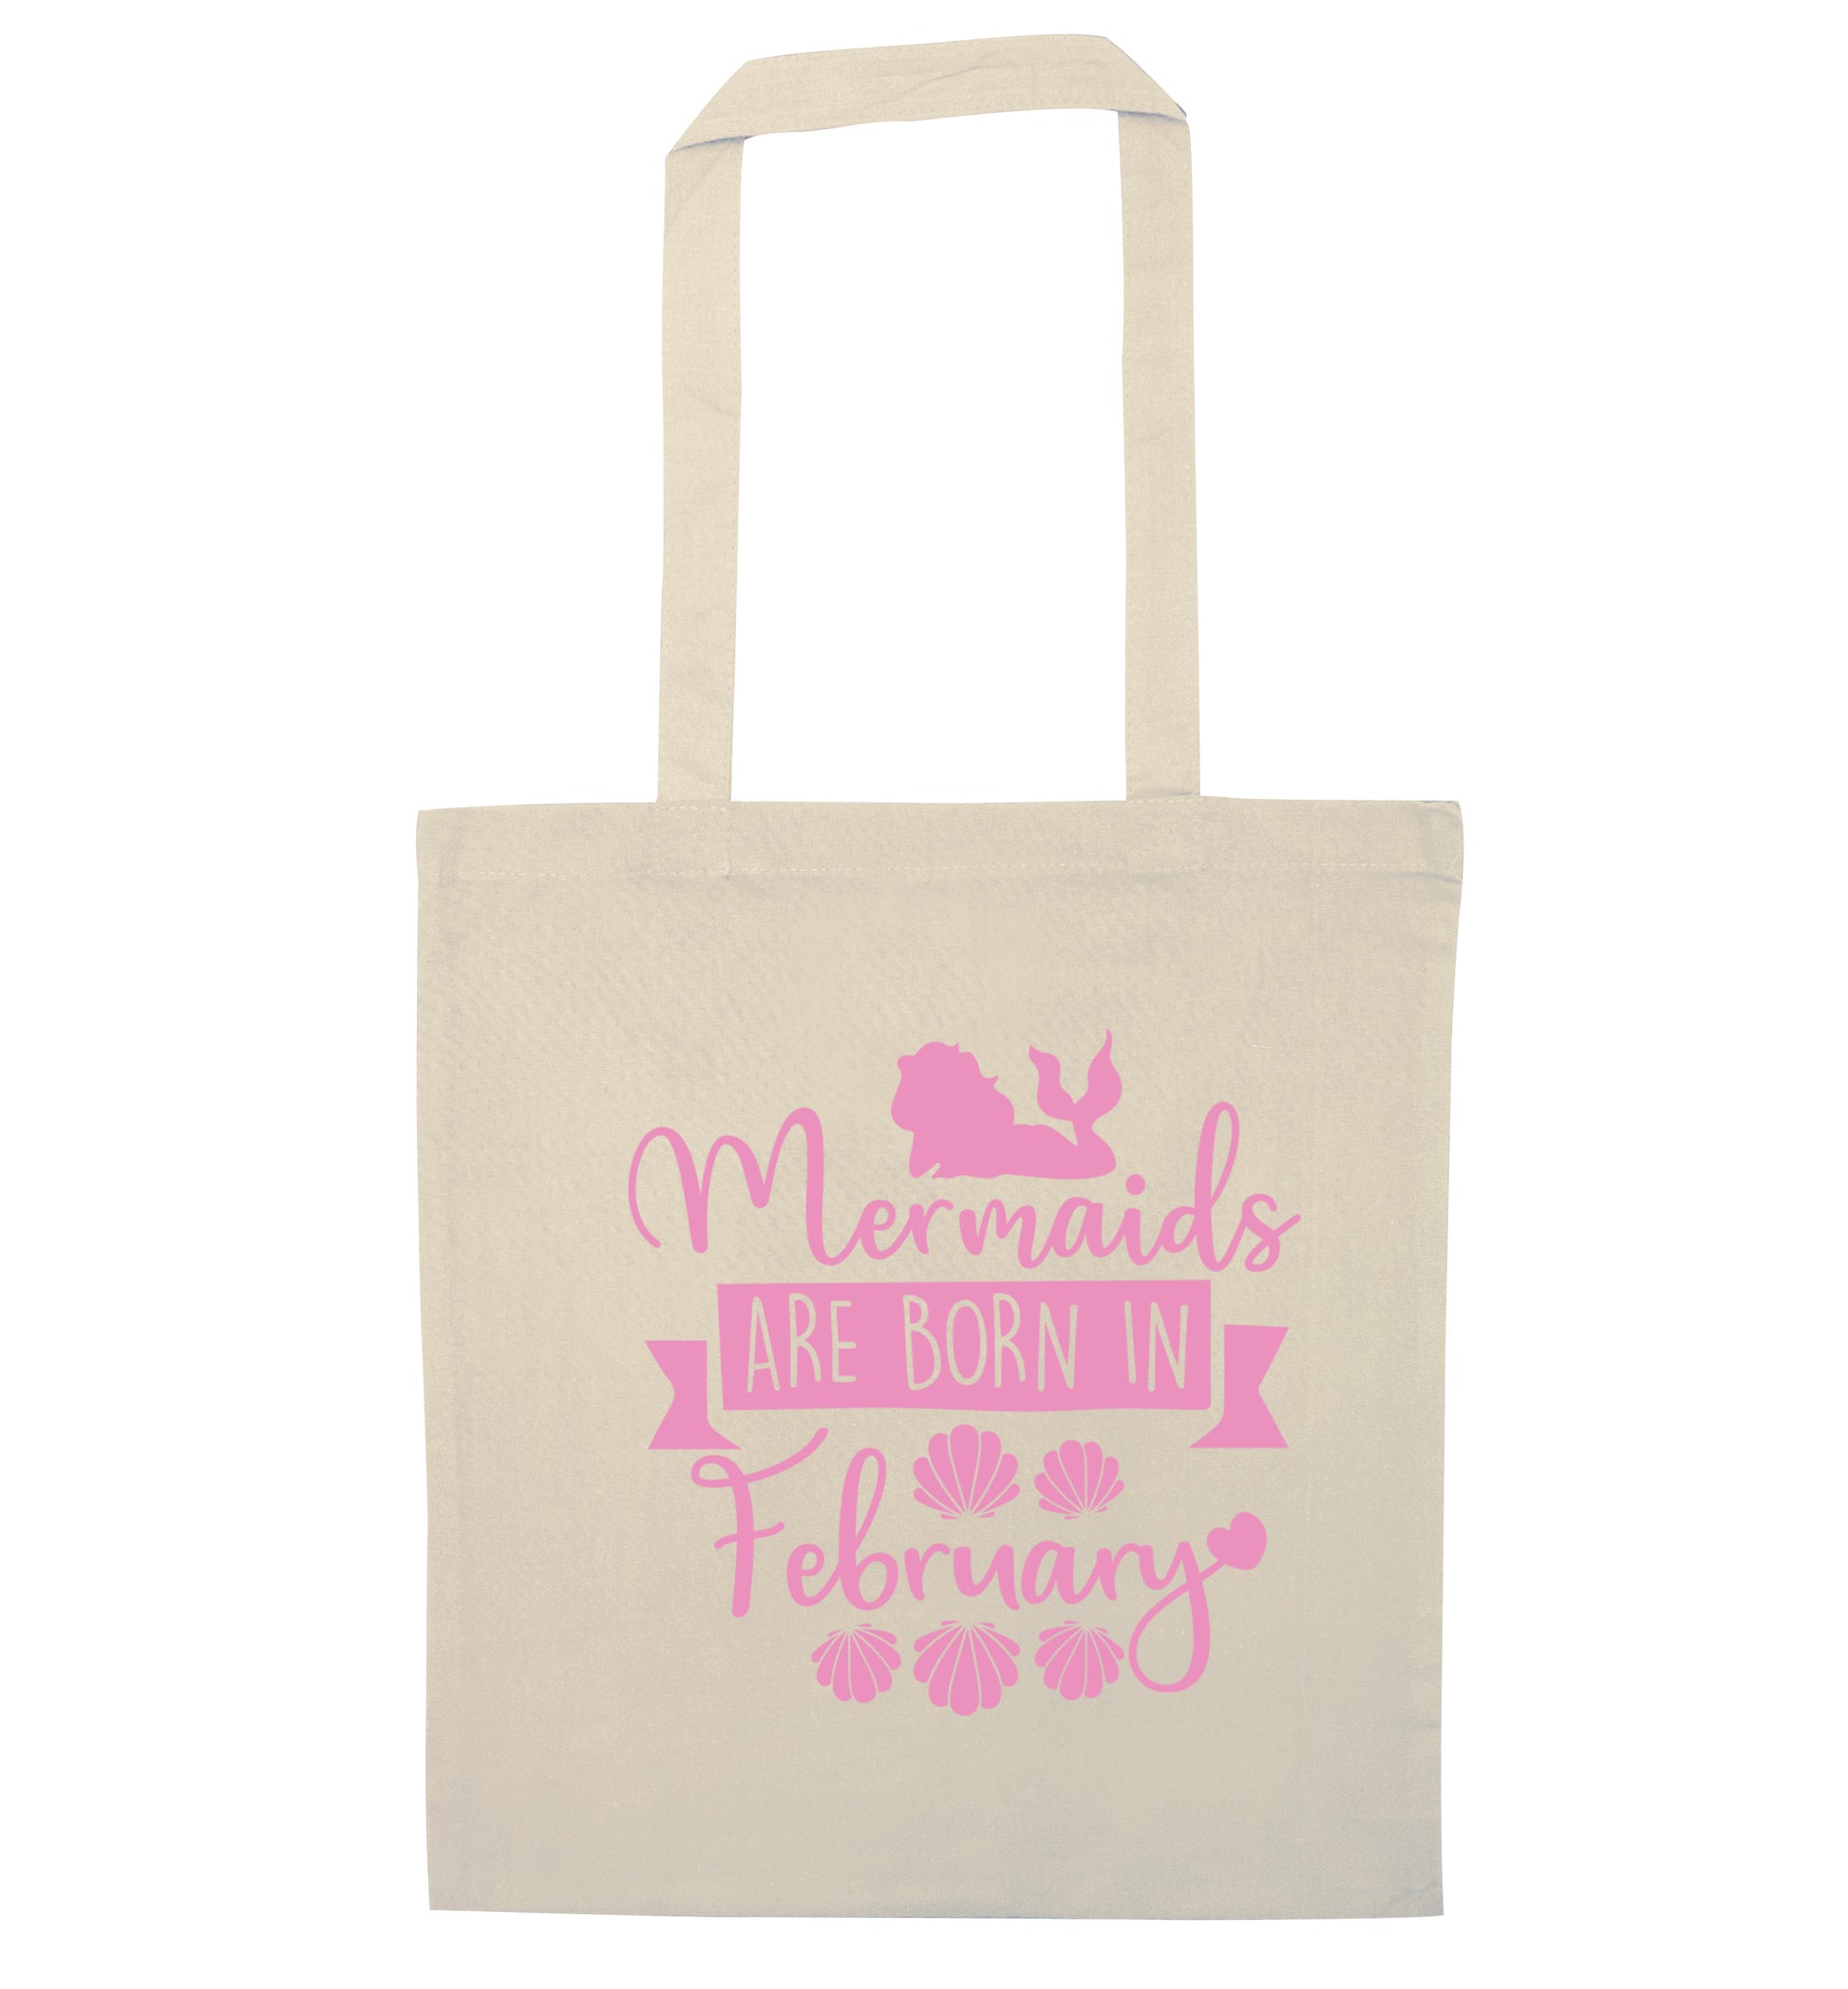 Mermaids are born in February natural tote bag